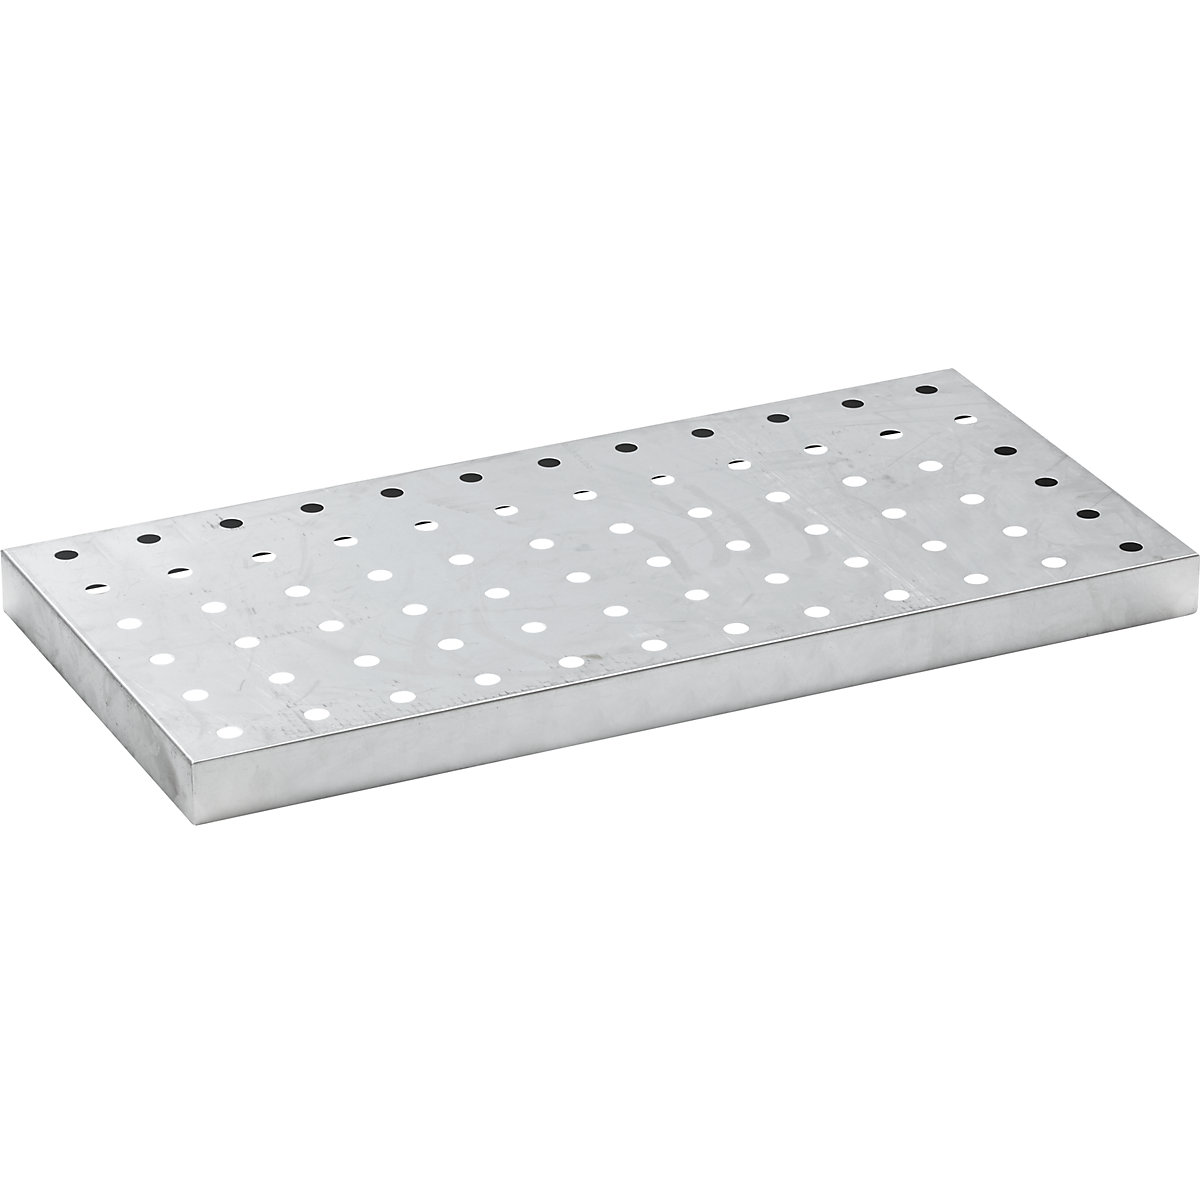 Perforated sheet metal grate – eurokraft basic, zinc plated, for LxWxH 940 x 470 x 60 mm-1